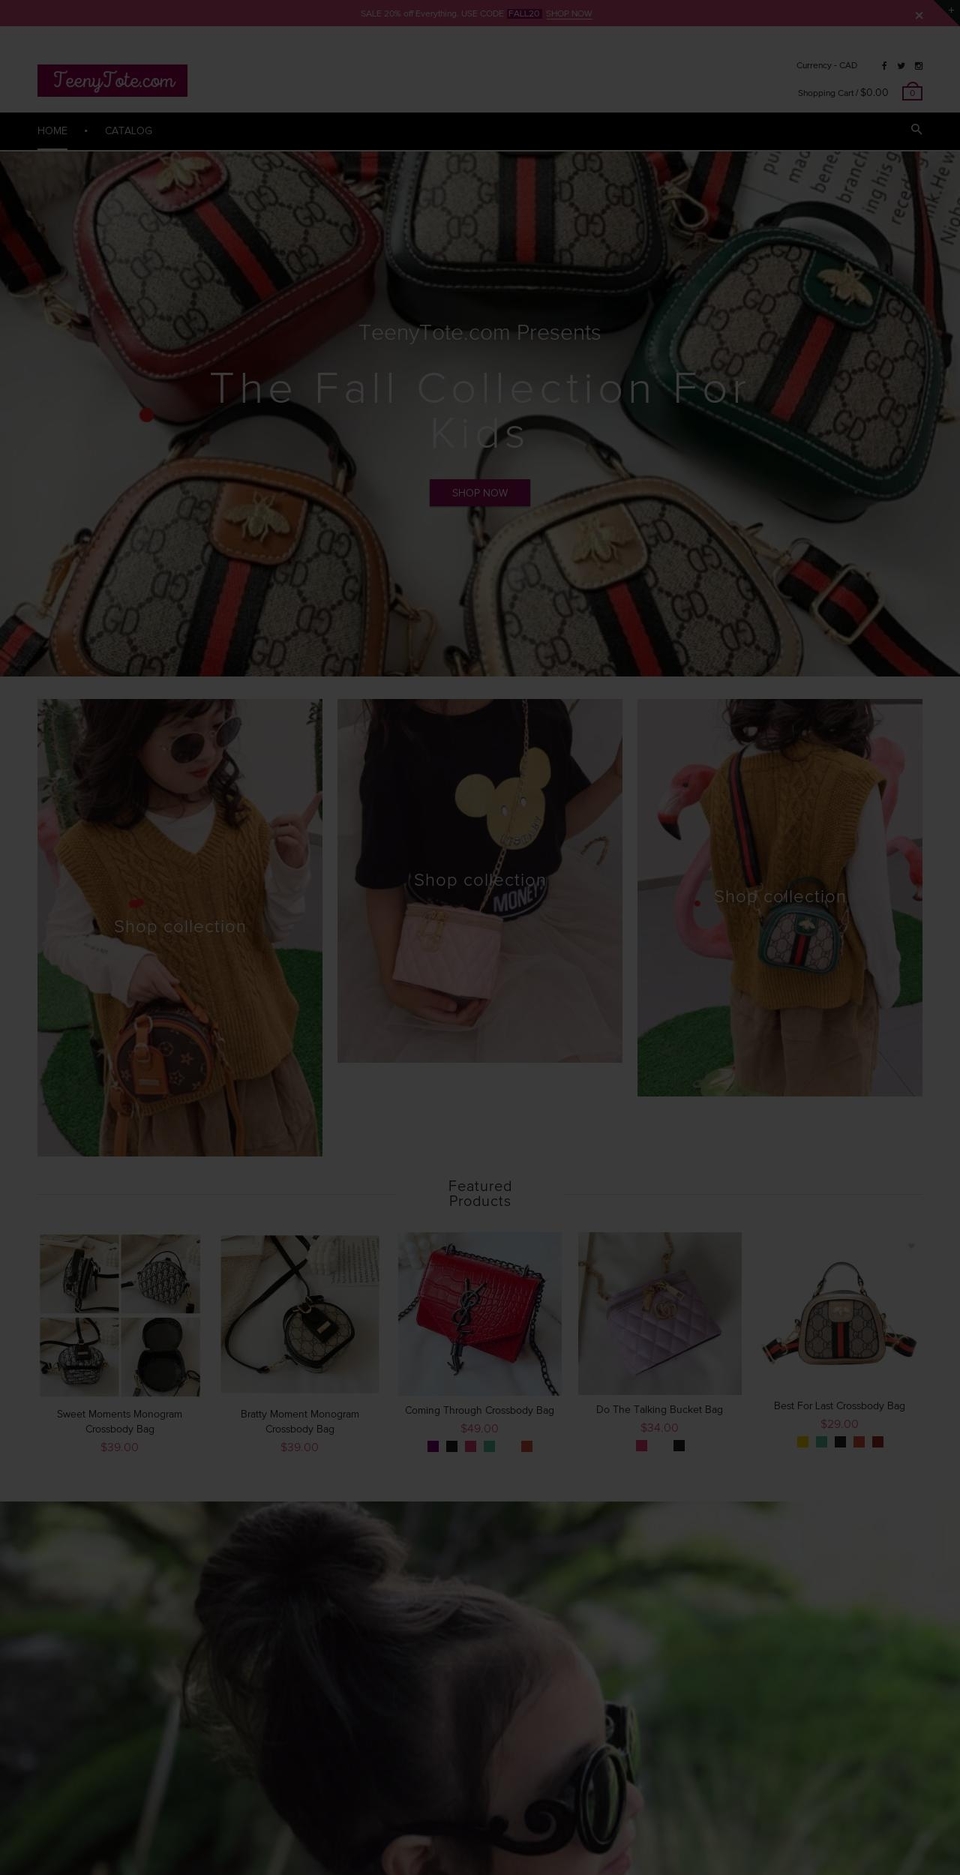 material Shopify theme site example teenytote.com